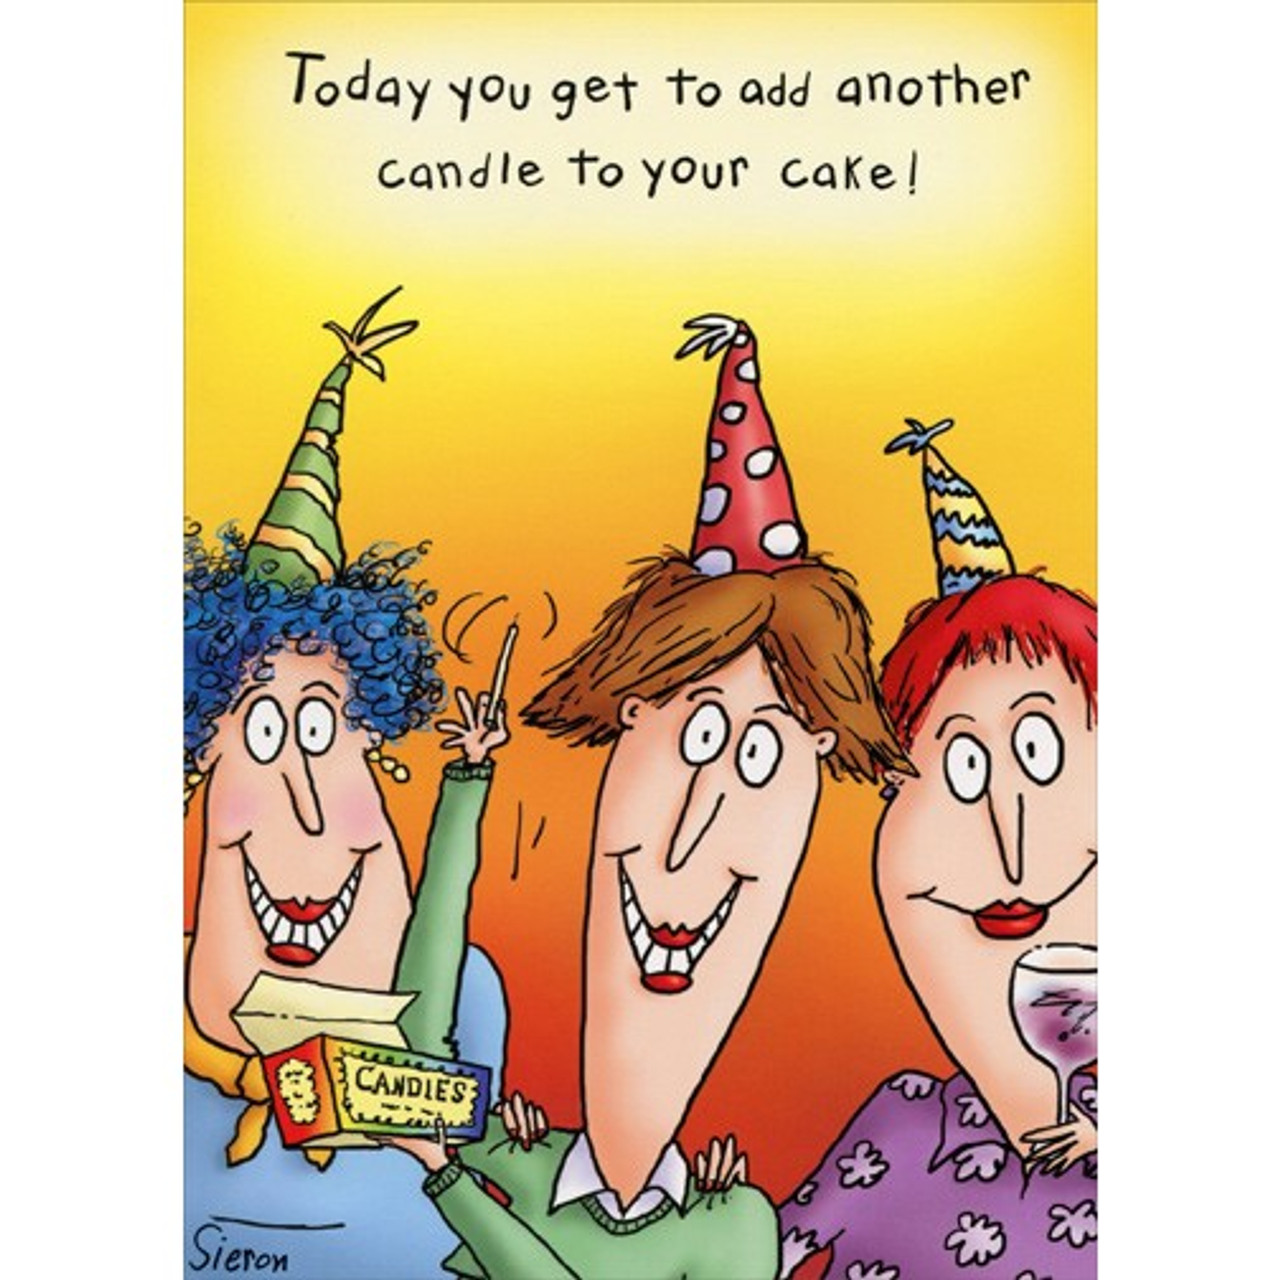 Add Another Candle Funny 80th Birthday Card for Her | PaperCards.com